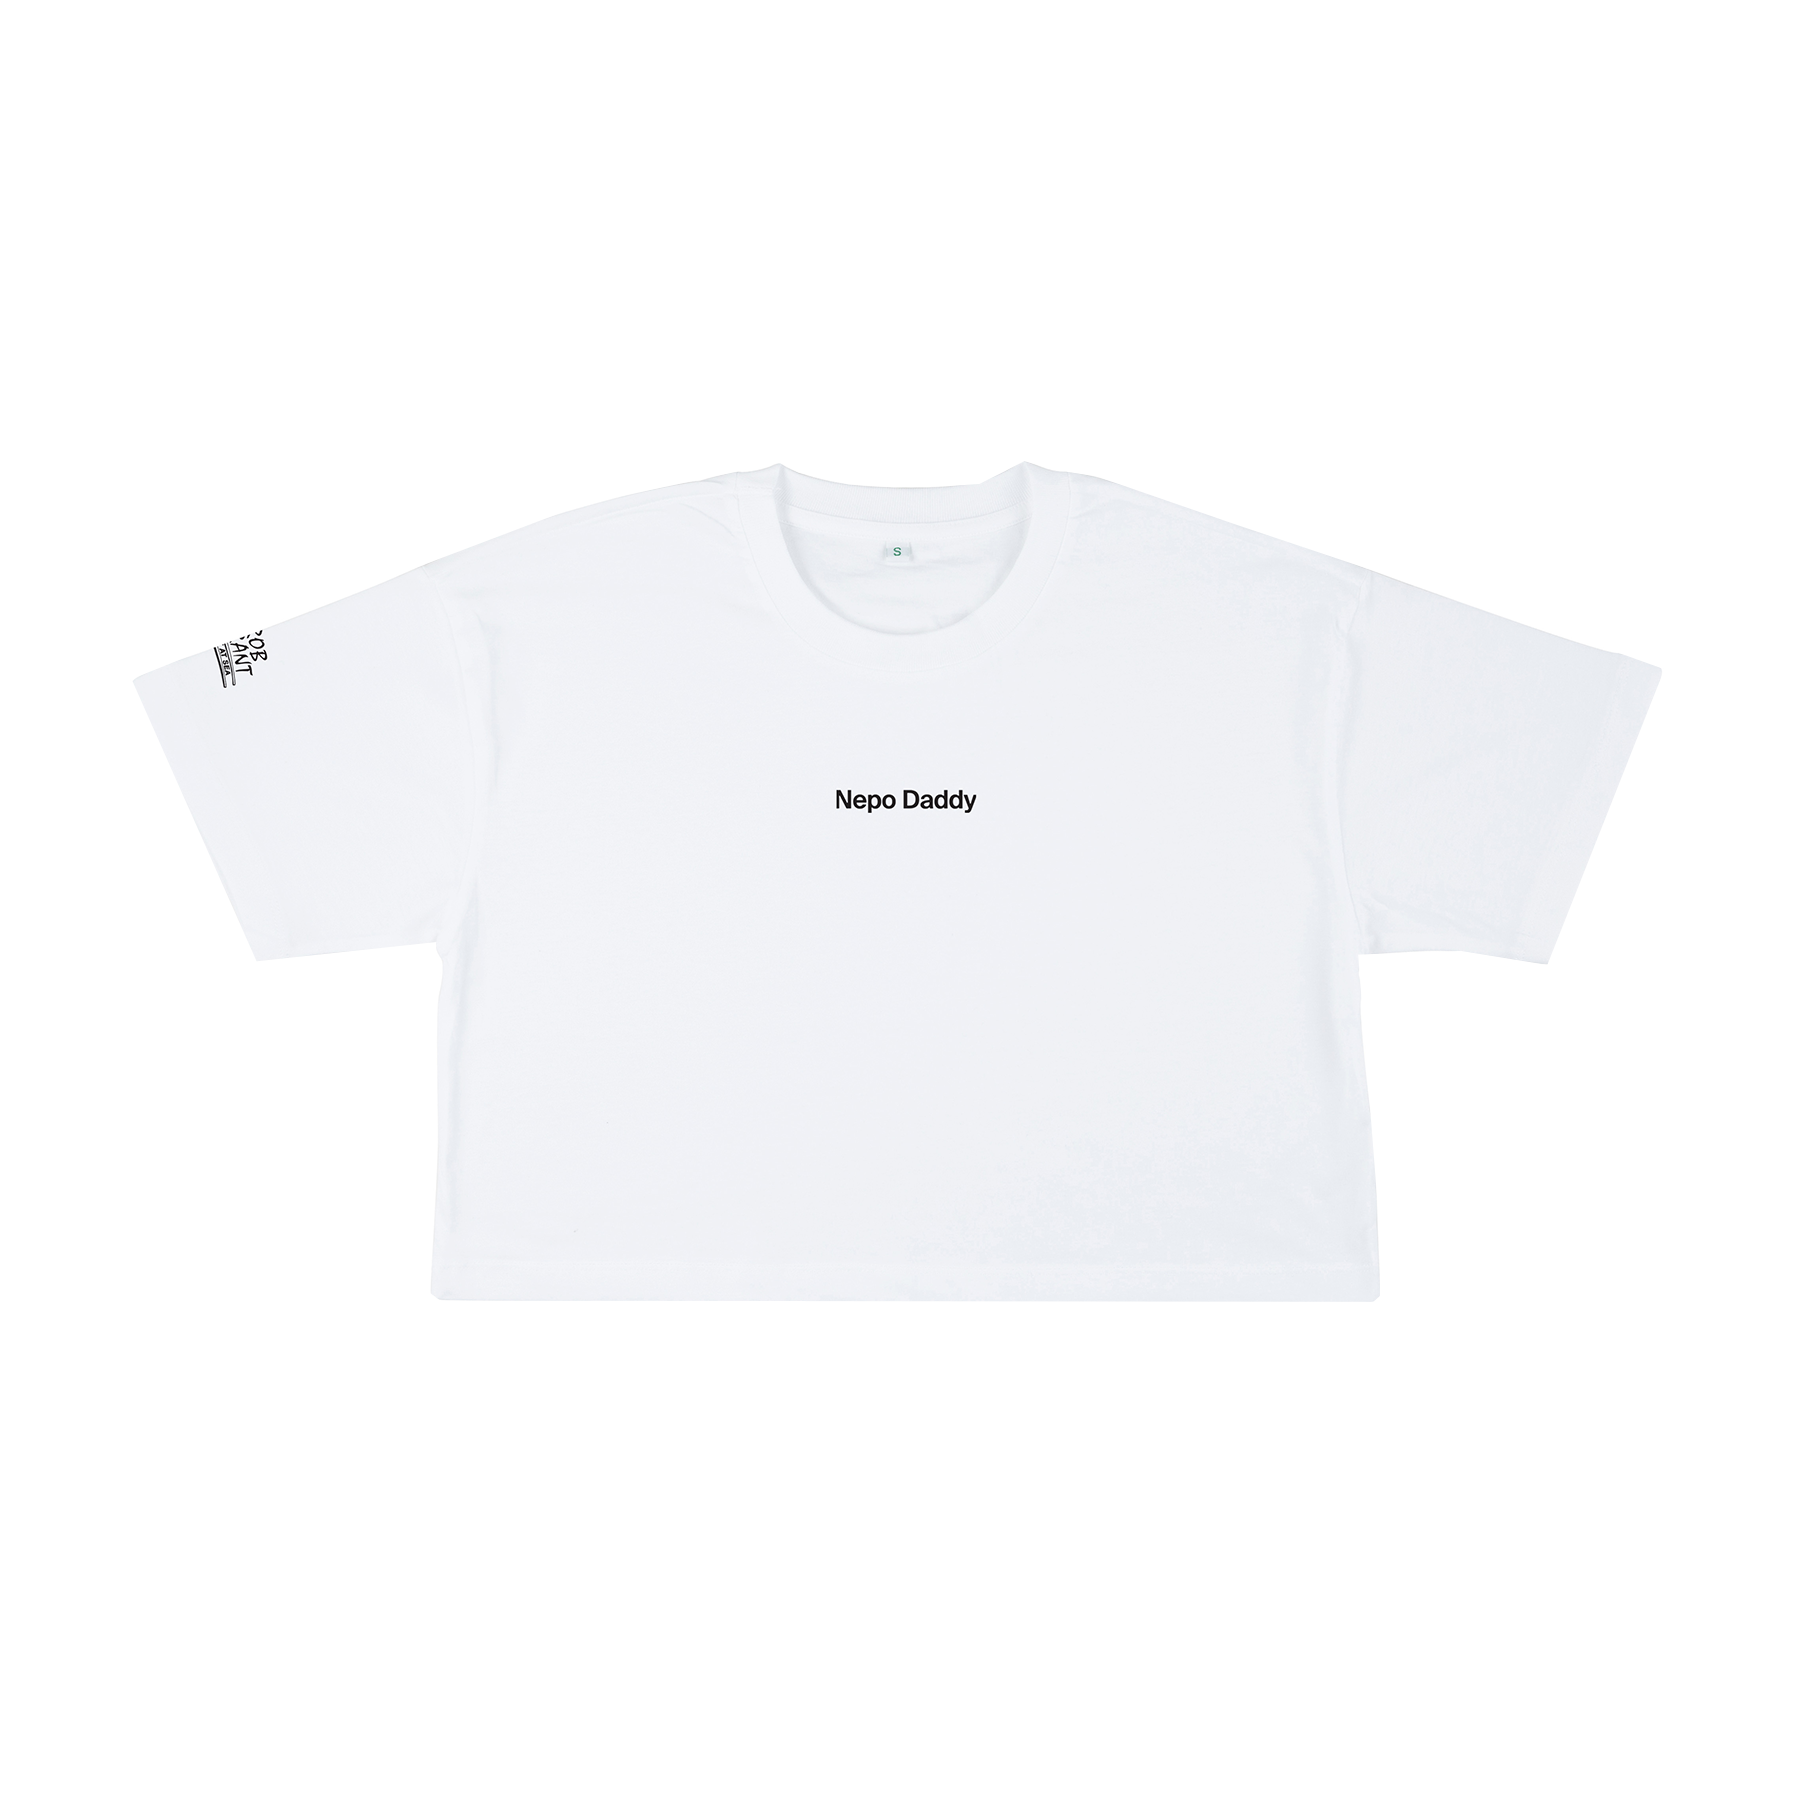 Rob Grant - Nepo Daddy Crop Tee